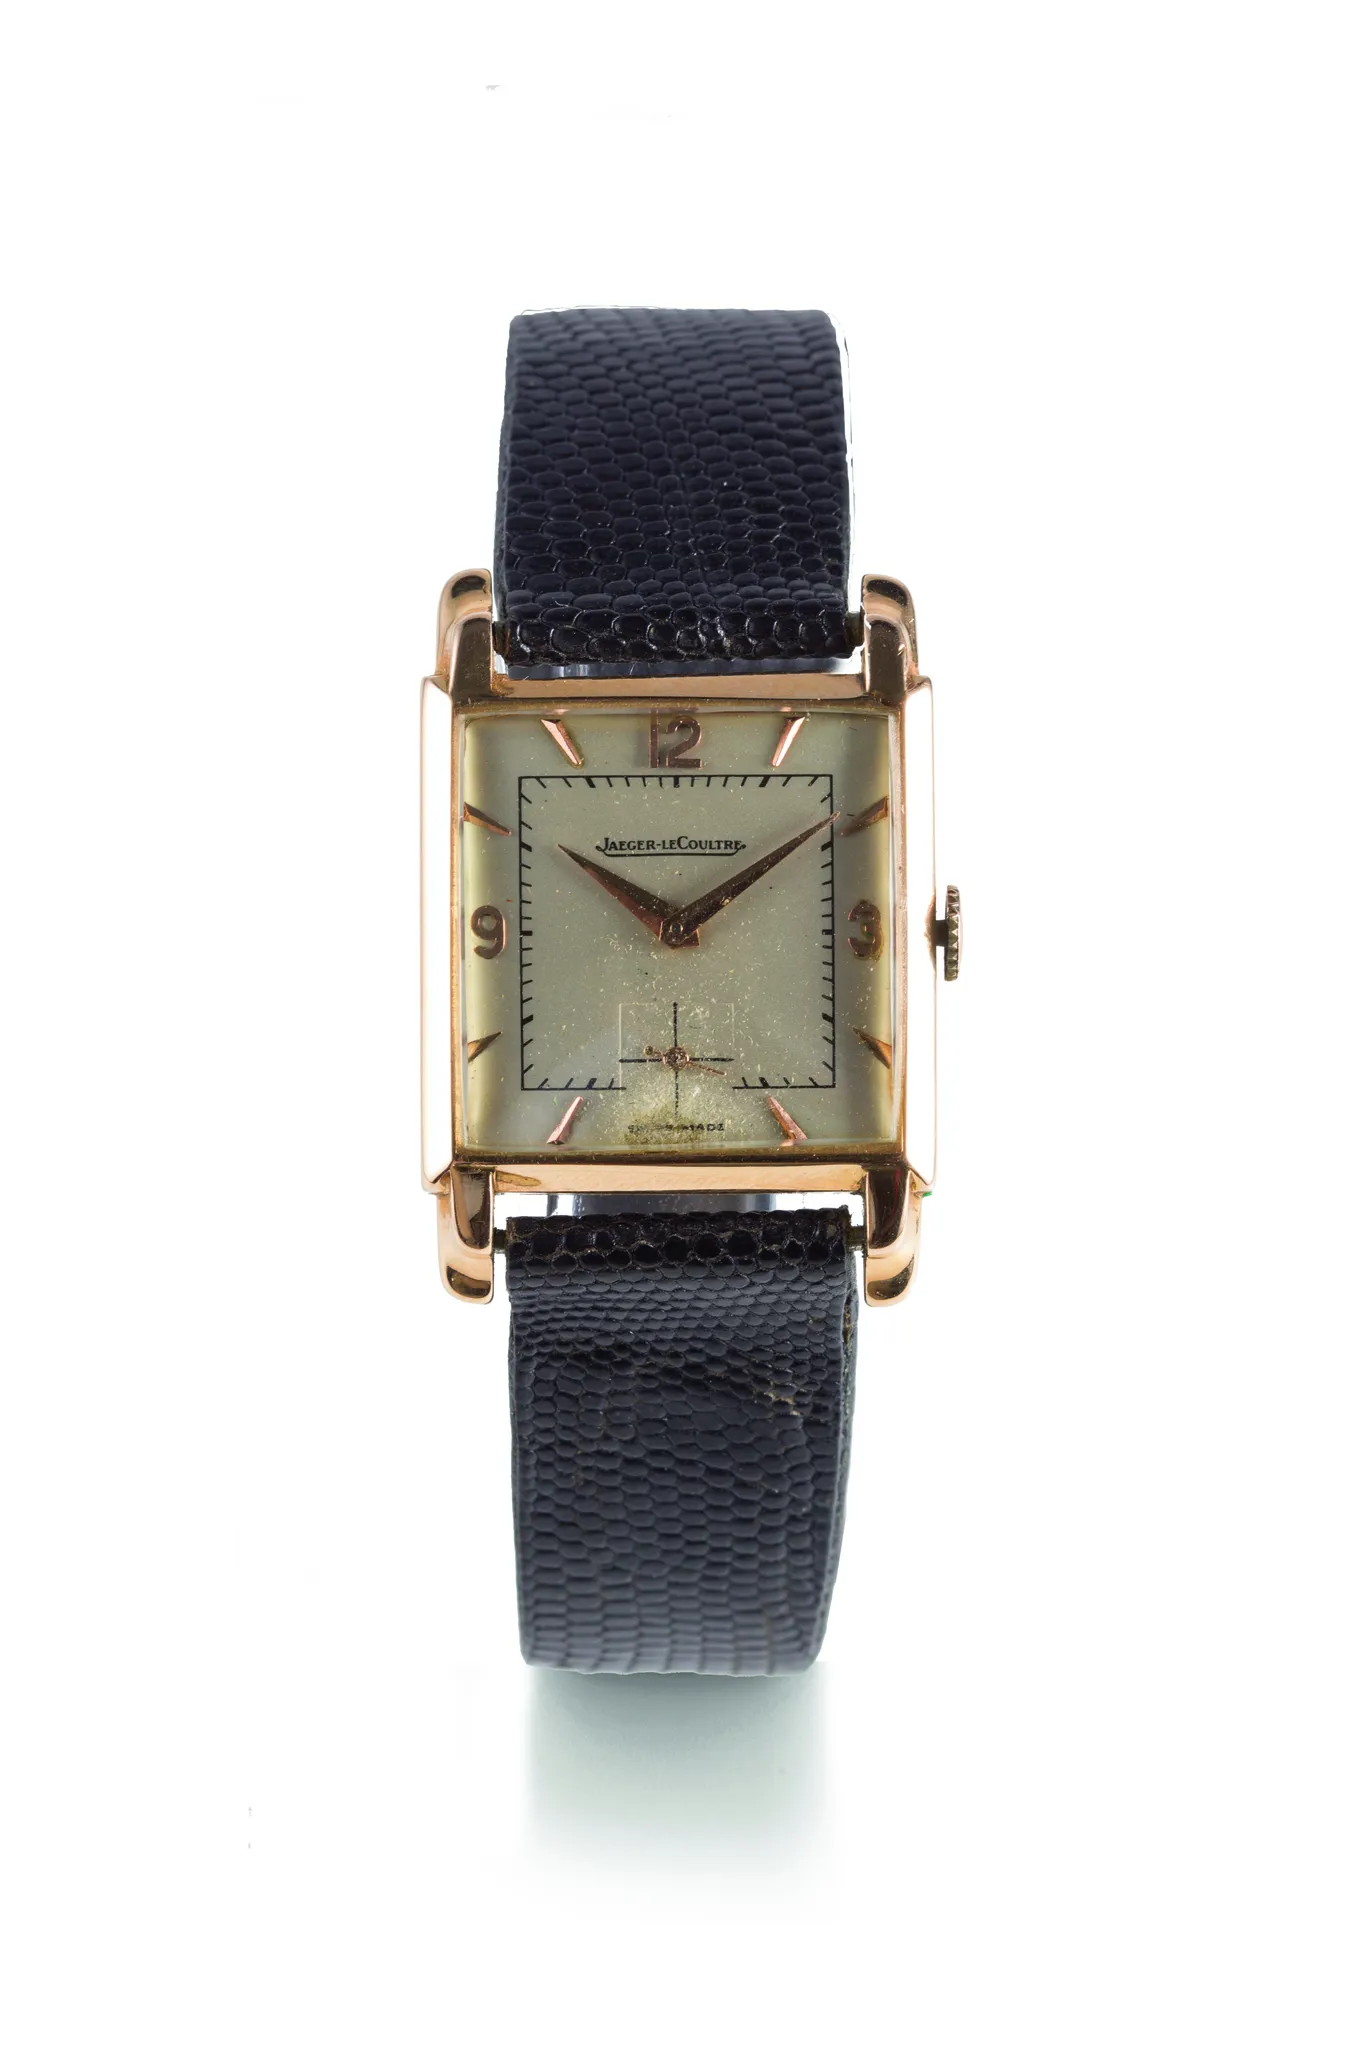 Jaeger-LeCoultre 14101 24mm Yellow gold Cream